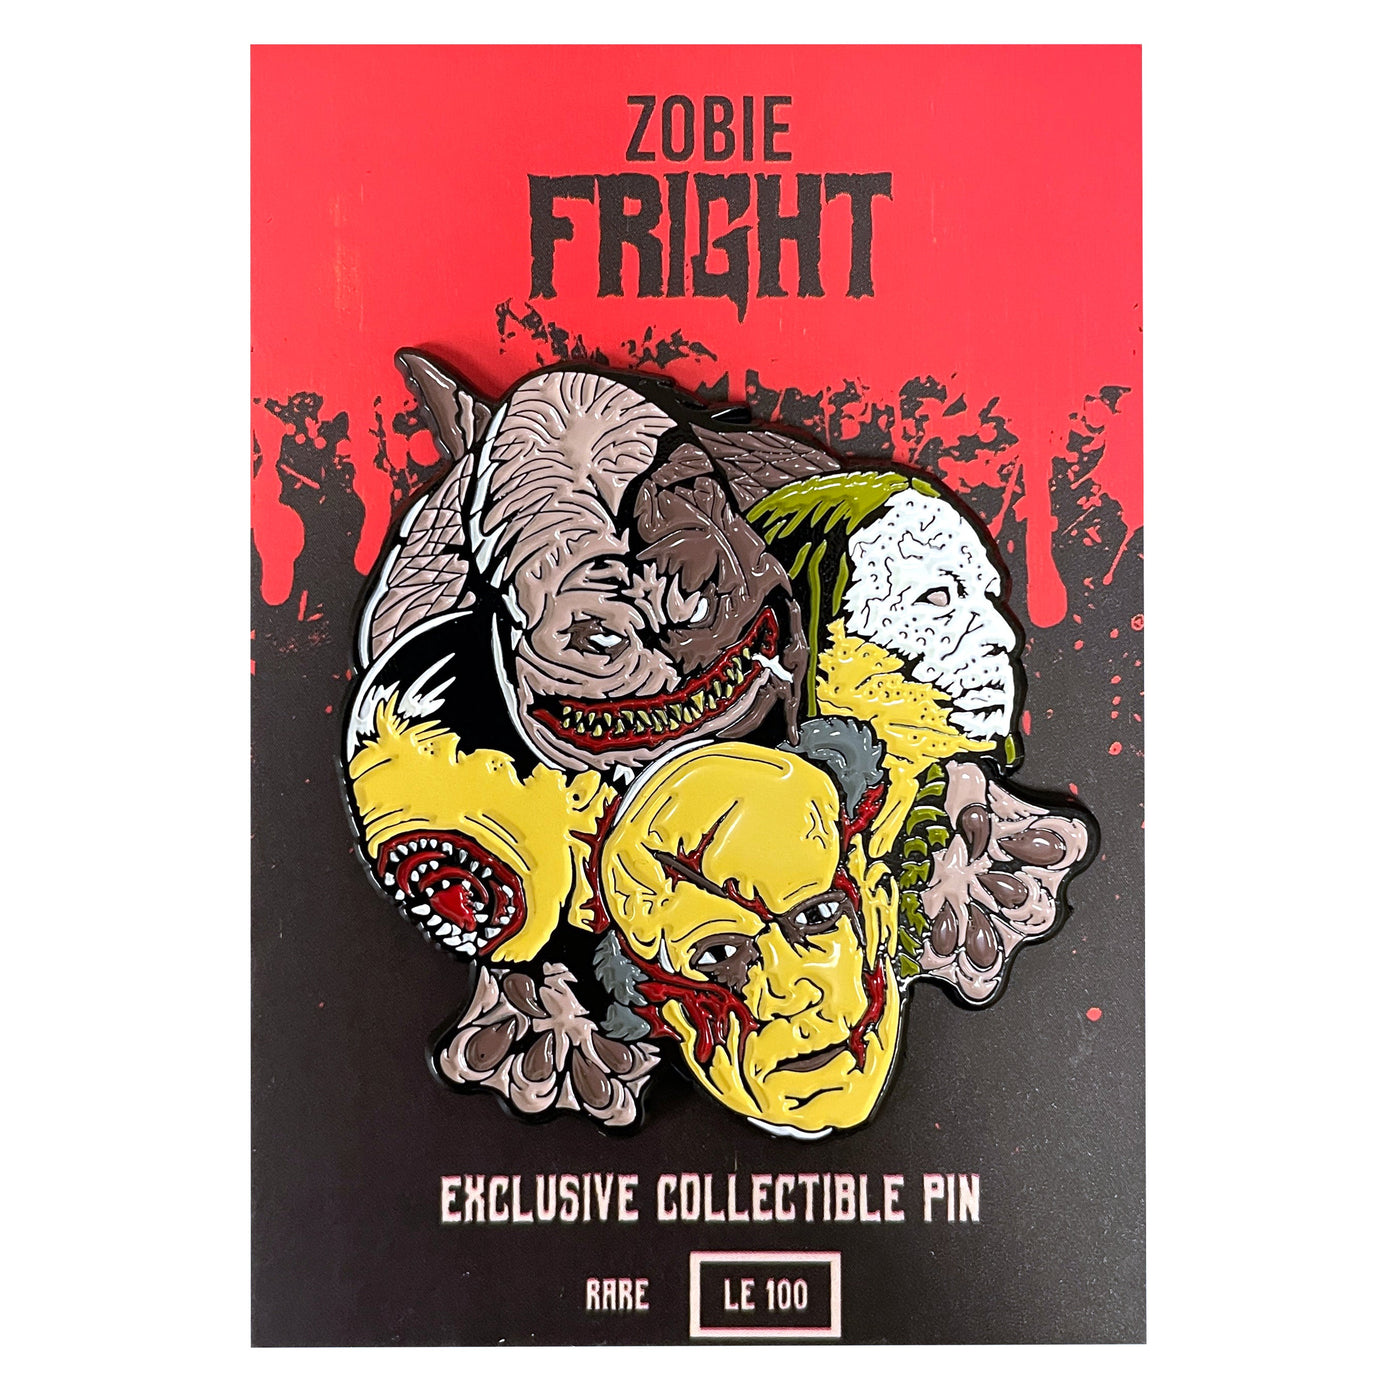 Zobie Fright Exclusive 2" Enamel Pin - Cabin in the Woods "Rare"